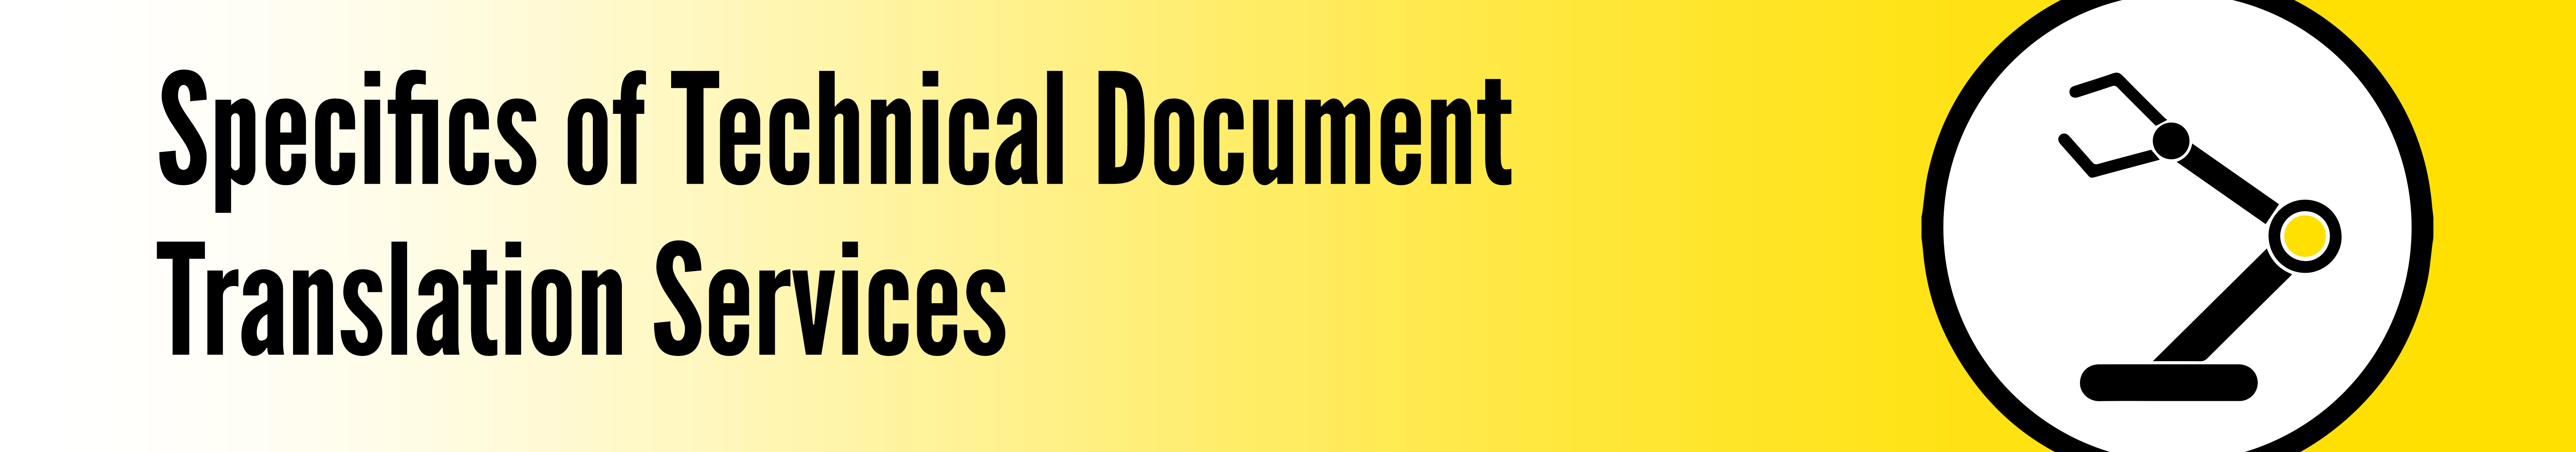 Specifics of Technical Document Translation Services